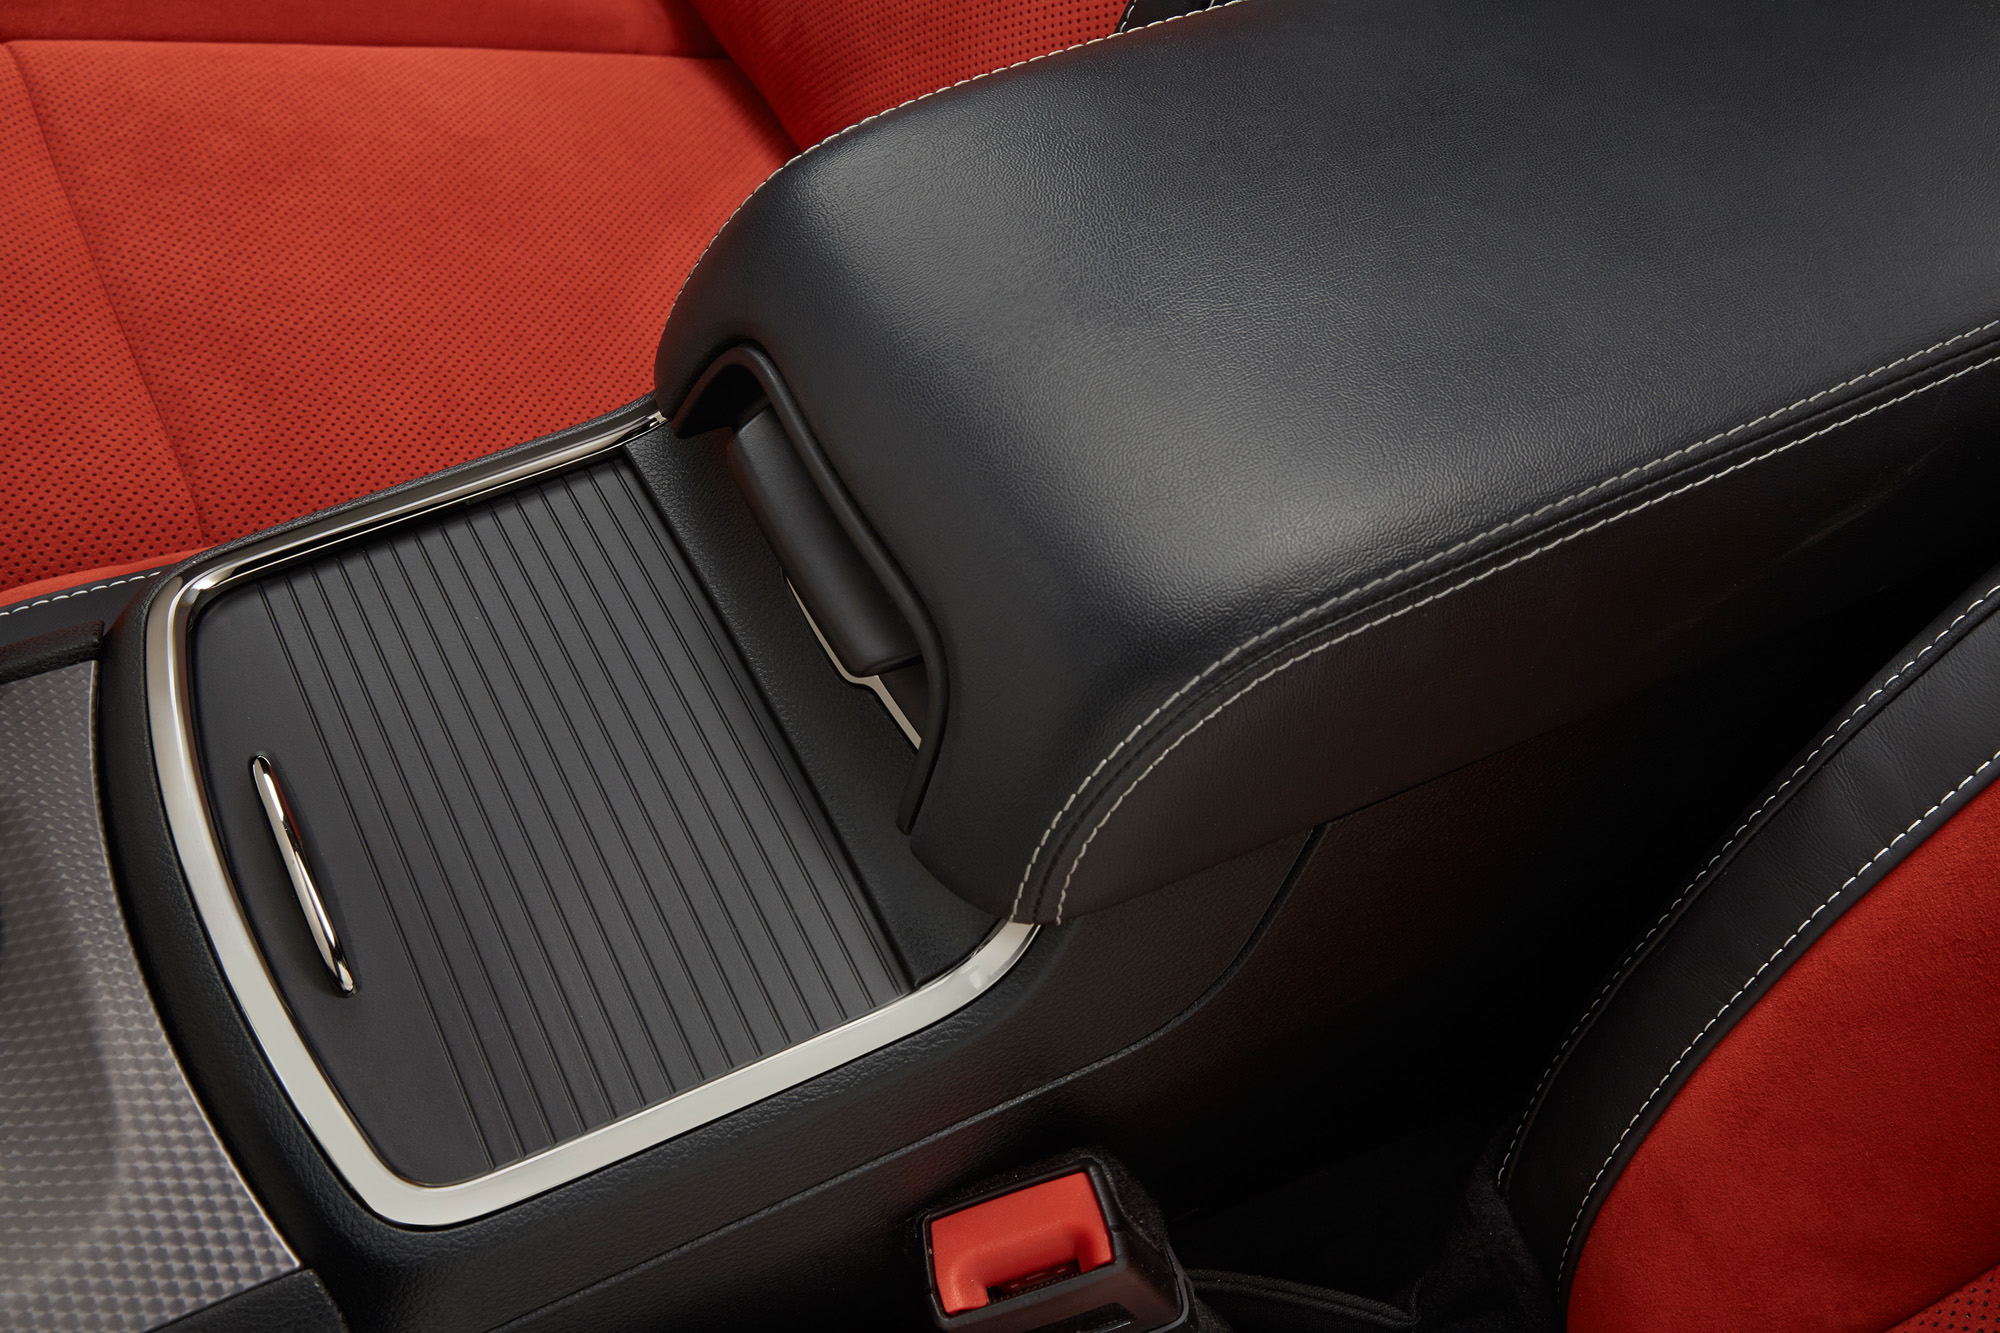 2015 Dodge Charger SRT Hellcat - center cupholders with covered